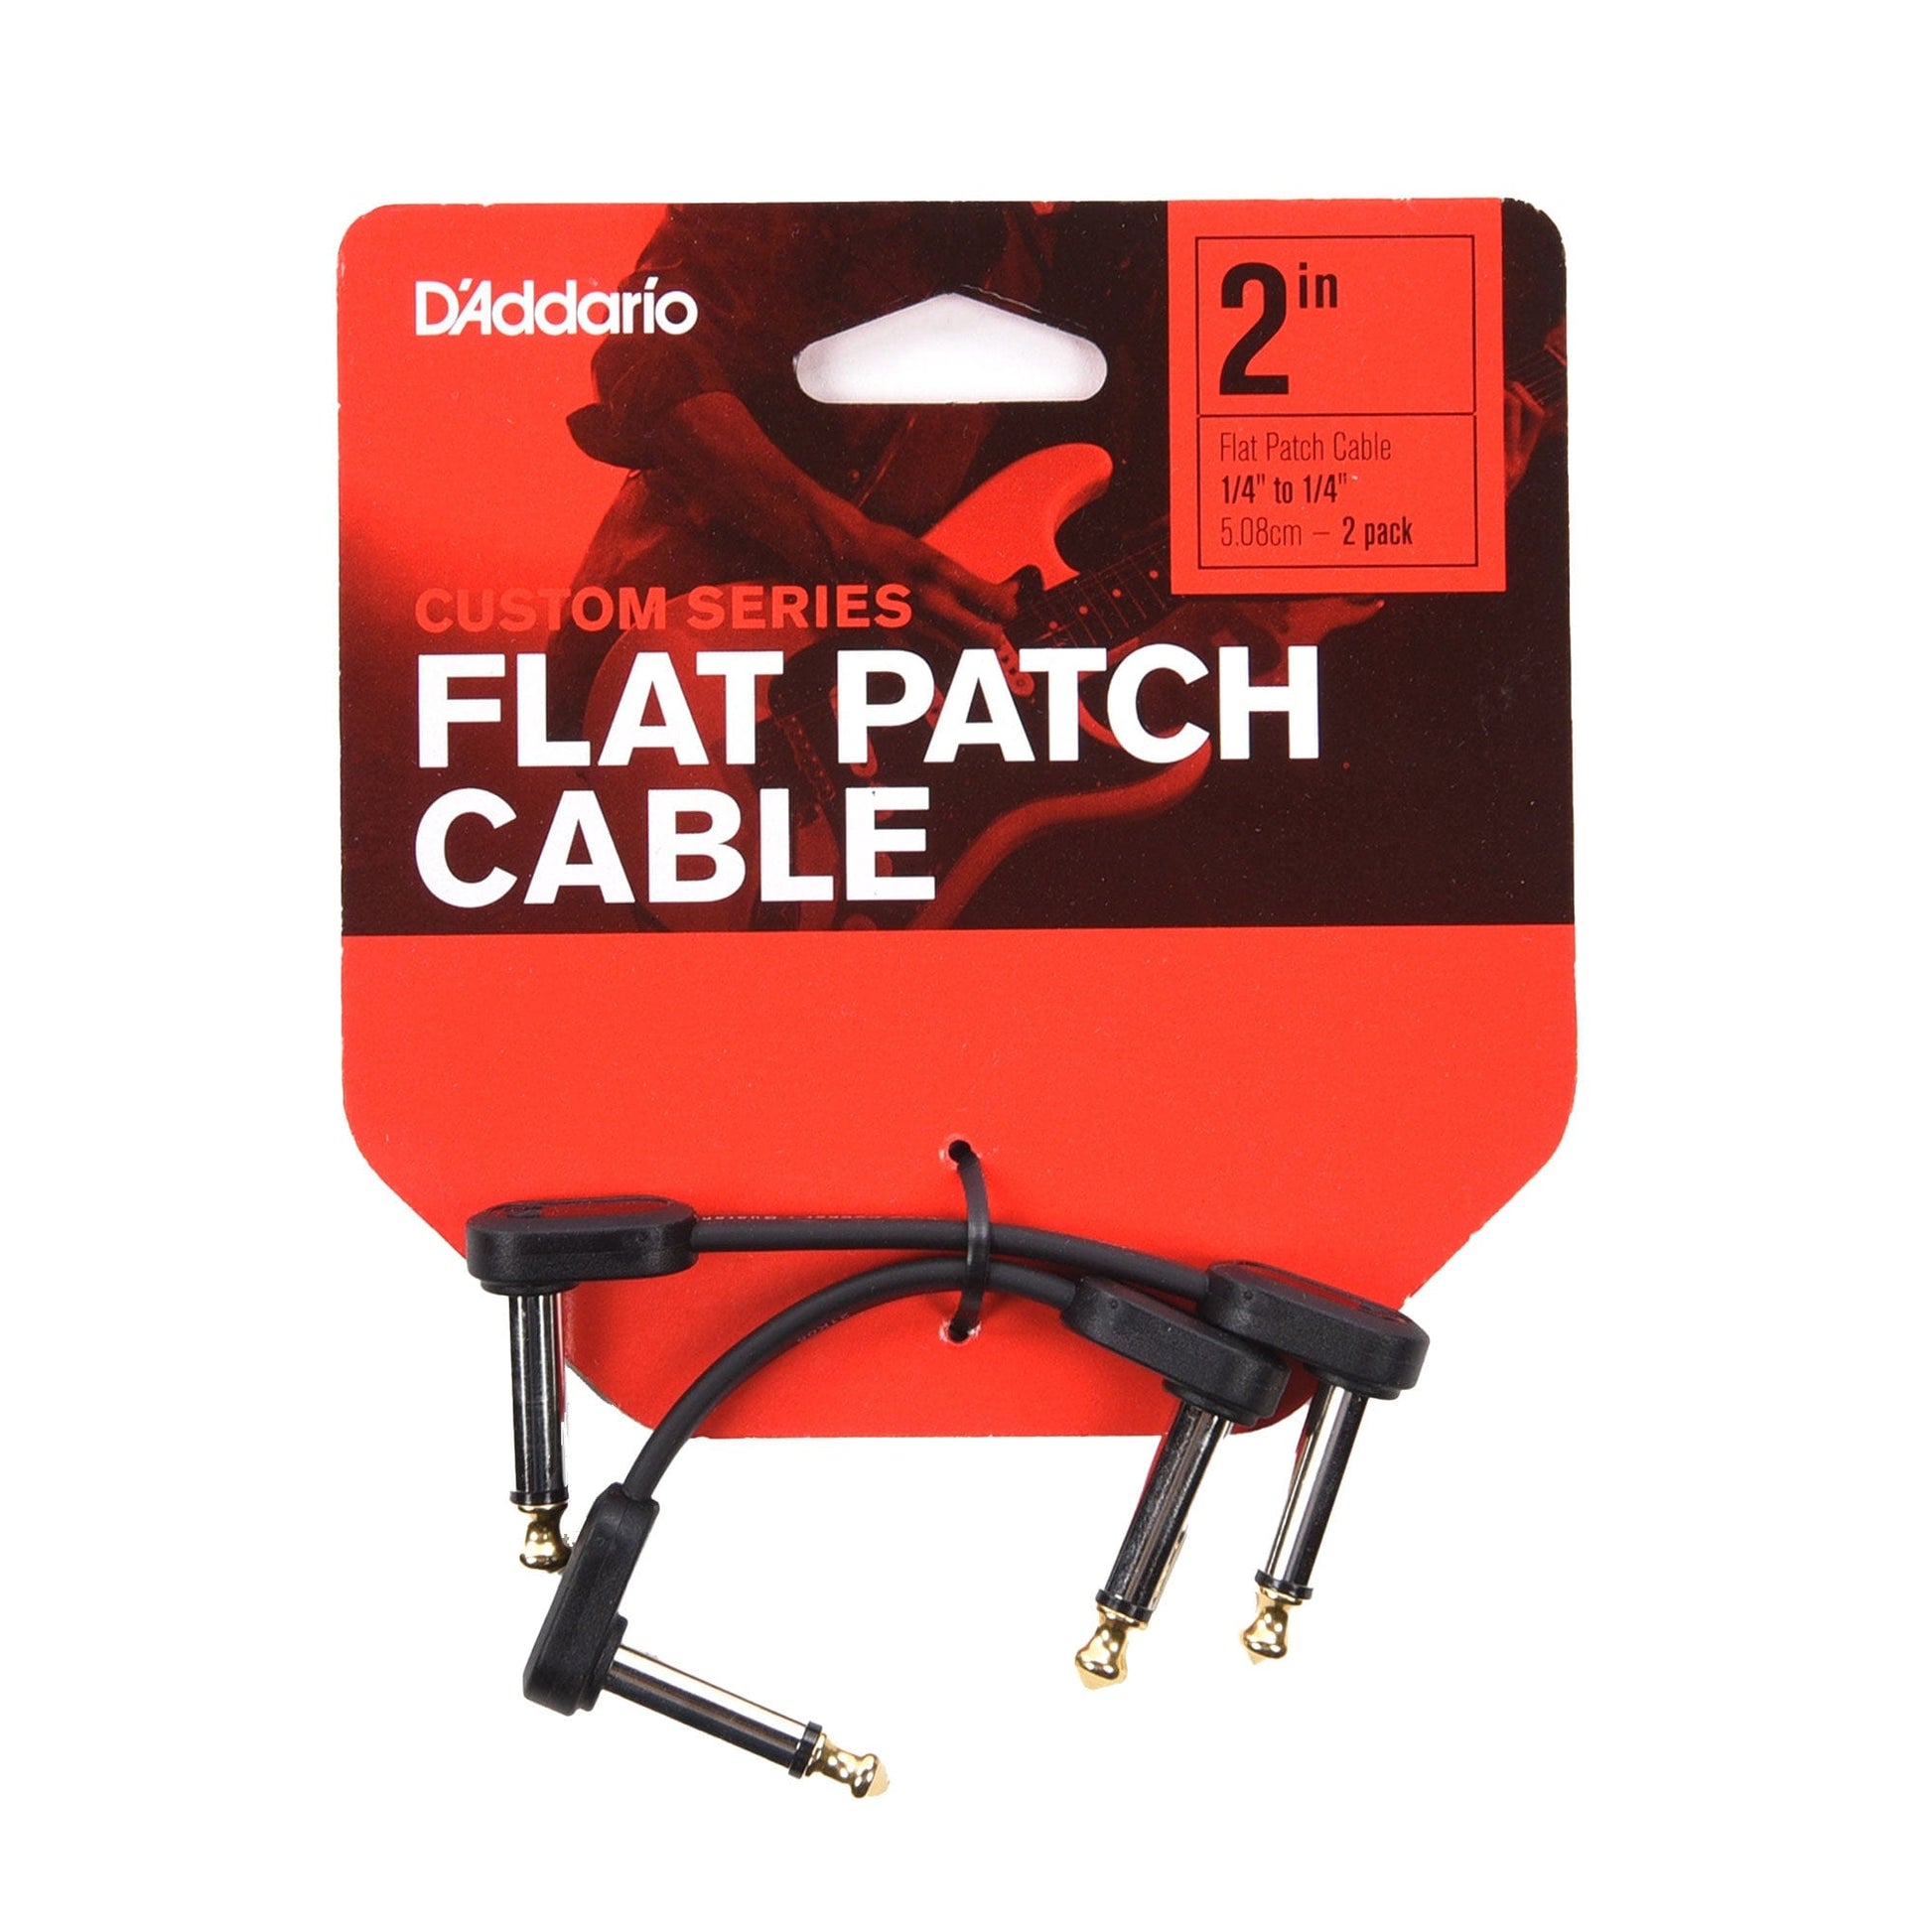 D'Addario Flat Patch Cable 2" Right Angle Twin Pack Accessories / Cables